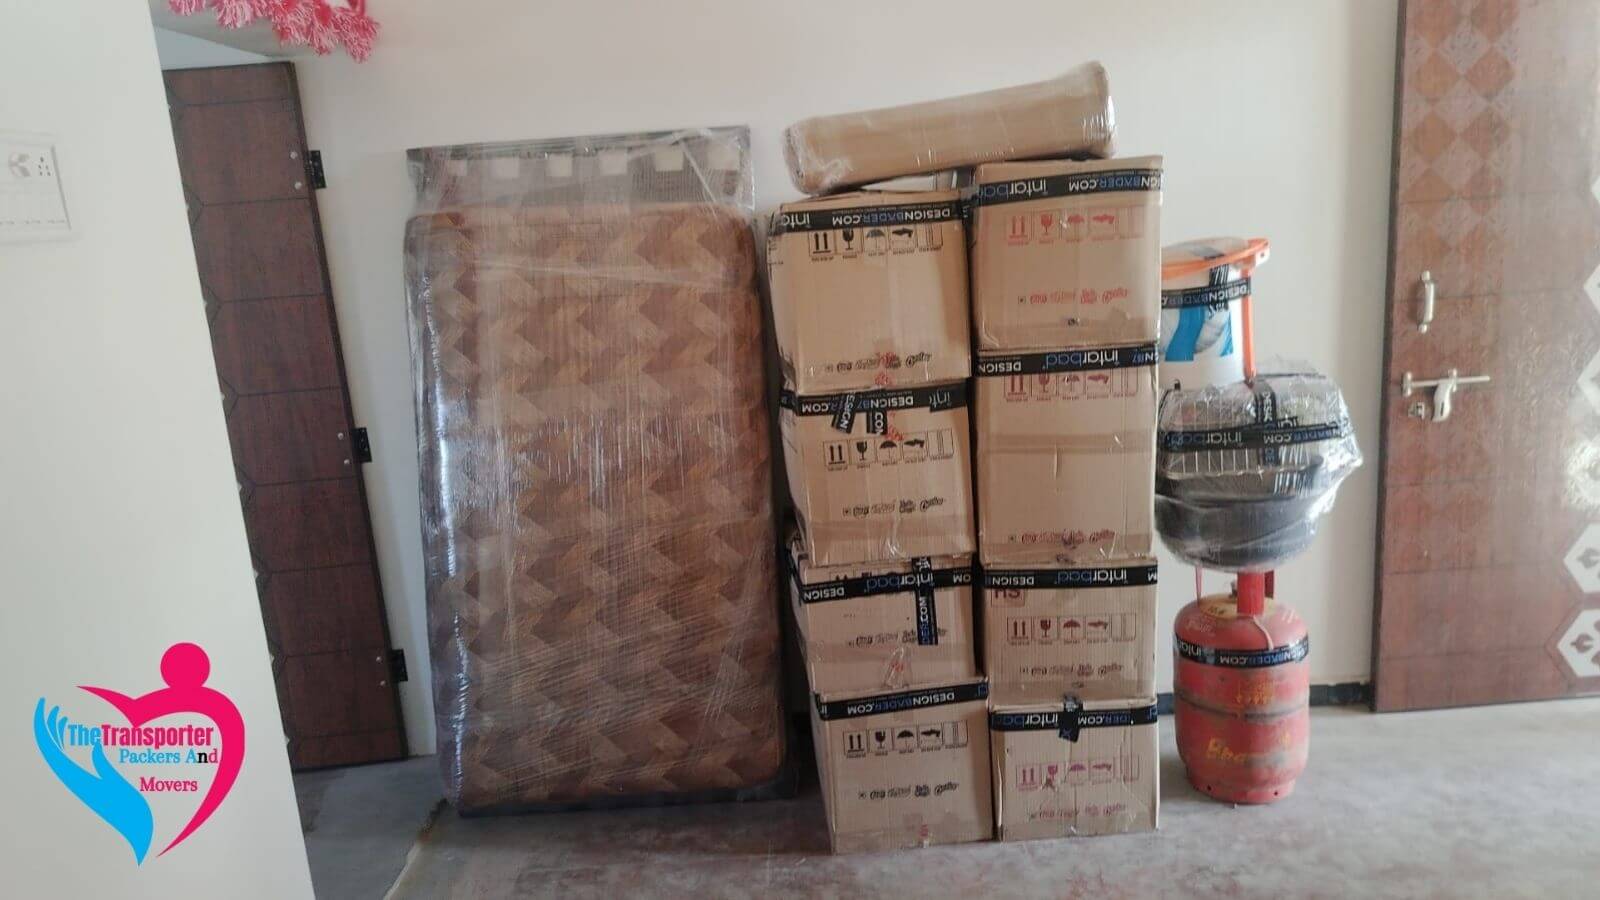 TheTransporter Packers and Movers in Agra - Our Commitment to You